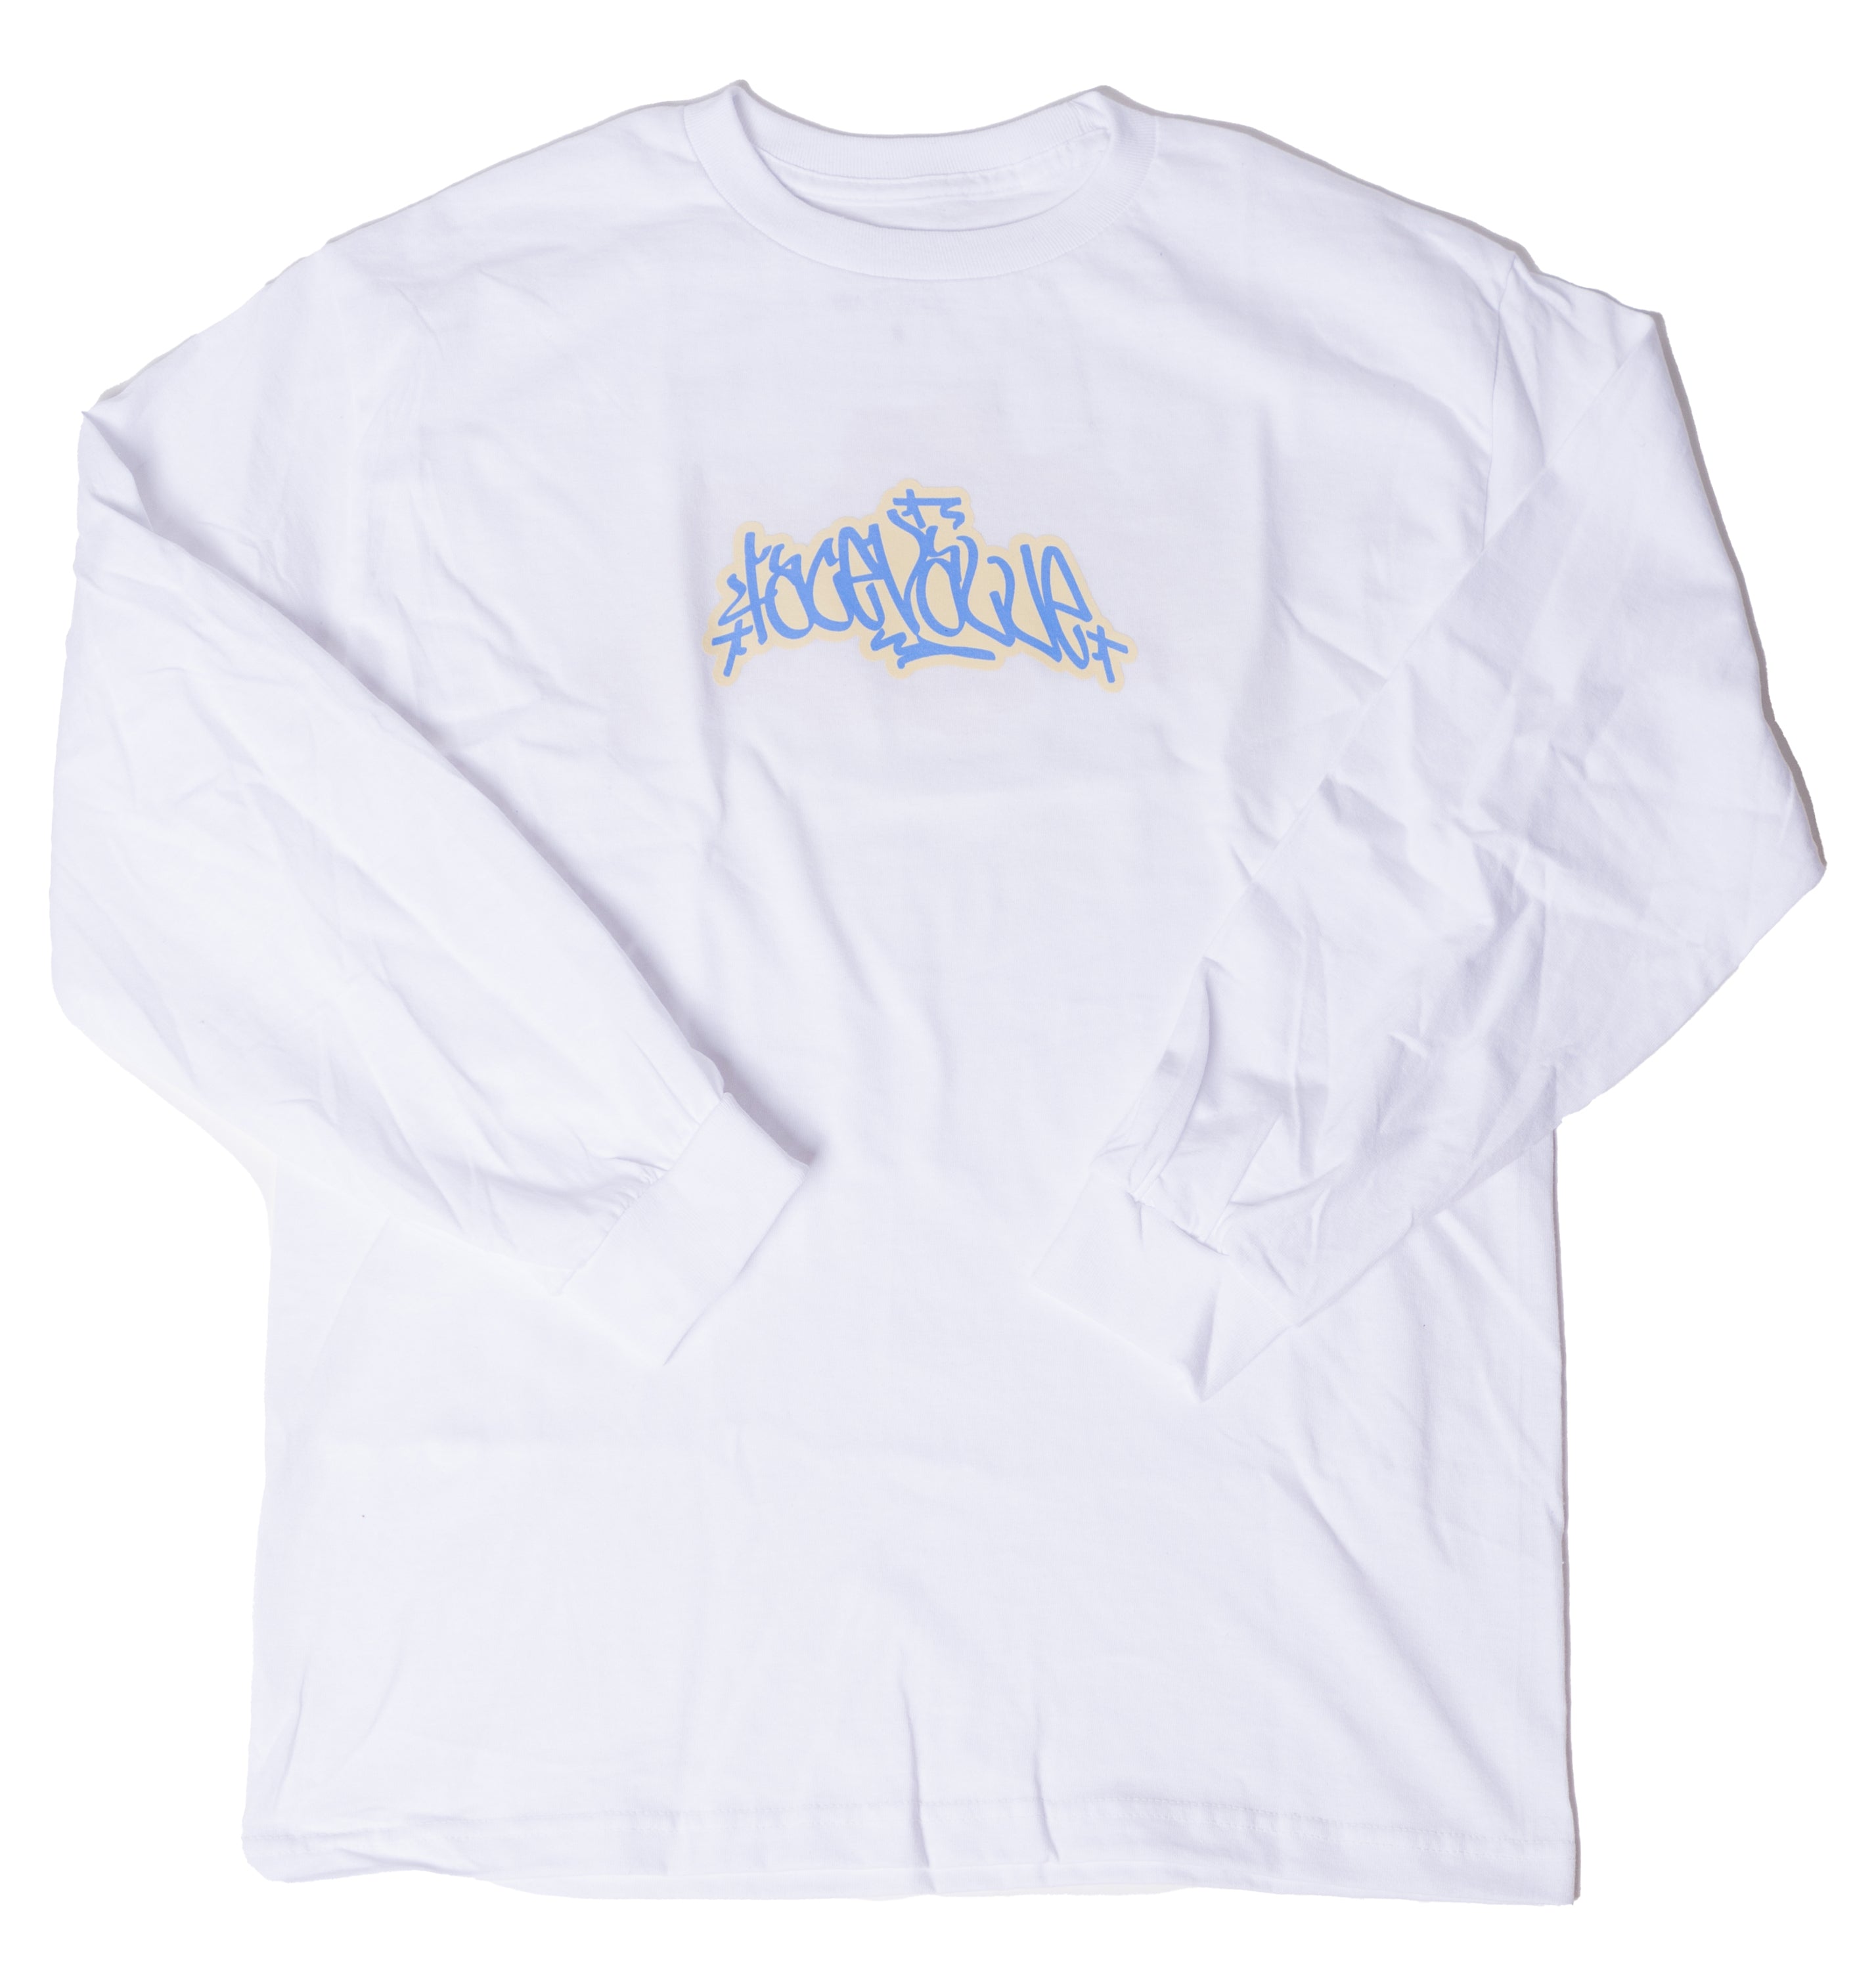 "Handstyle" Long Sleeve